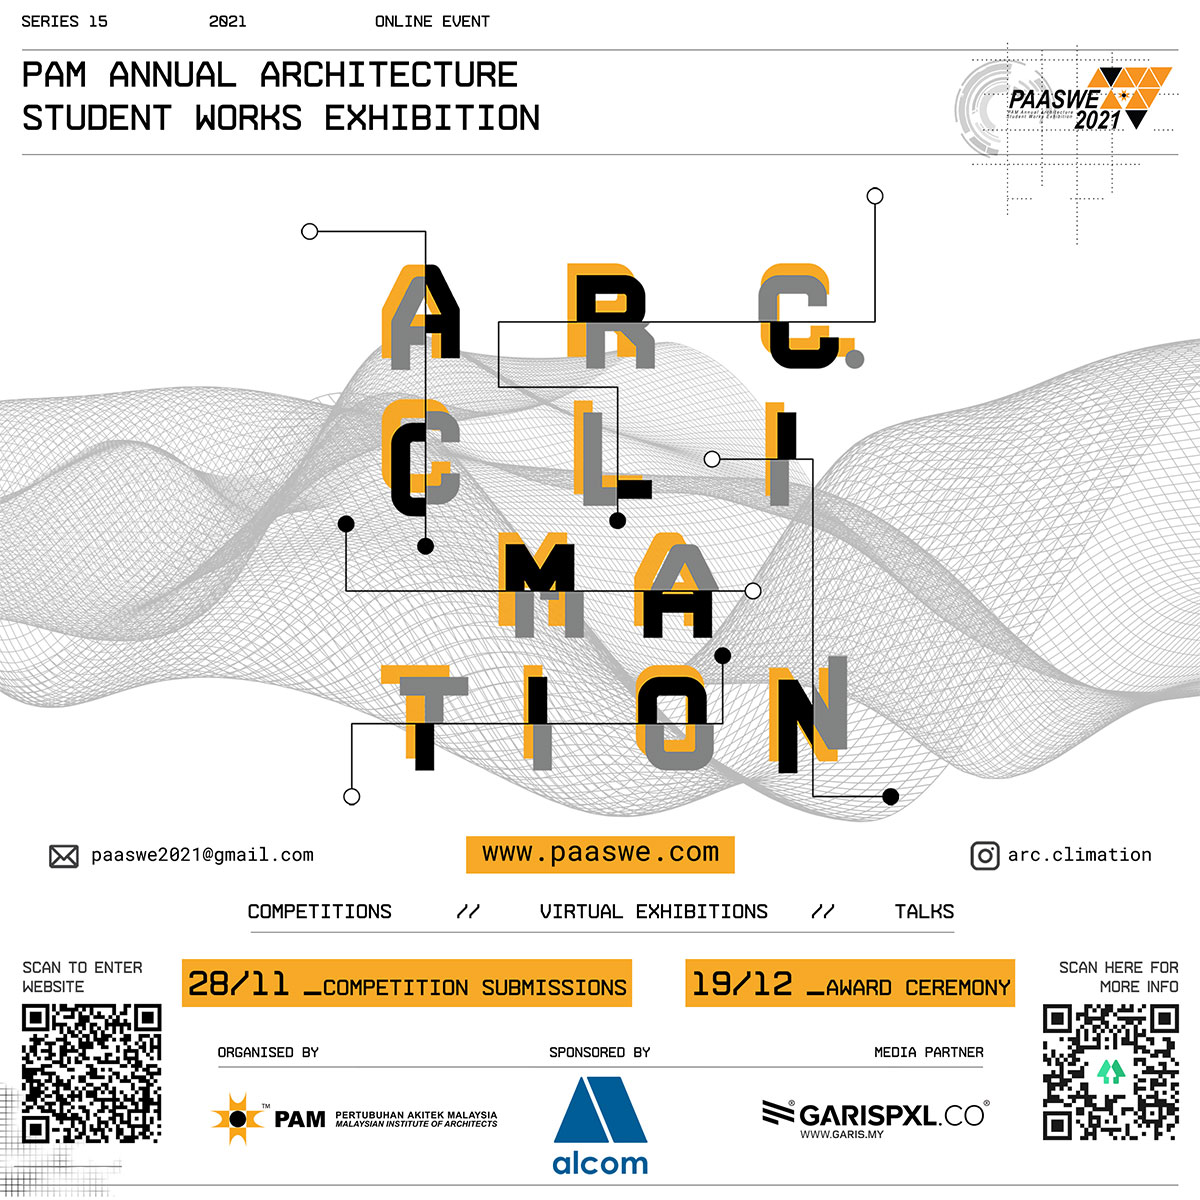 PAM Annual Architecture Student Works Exhibition 2021